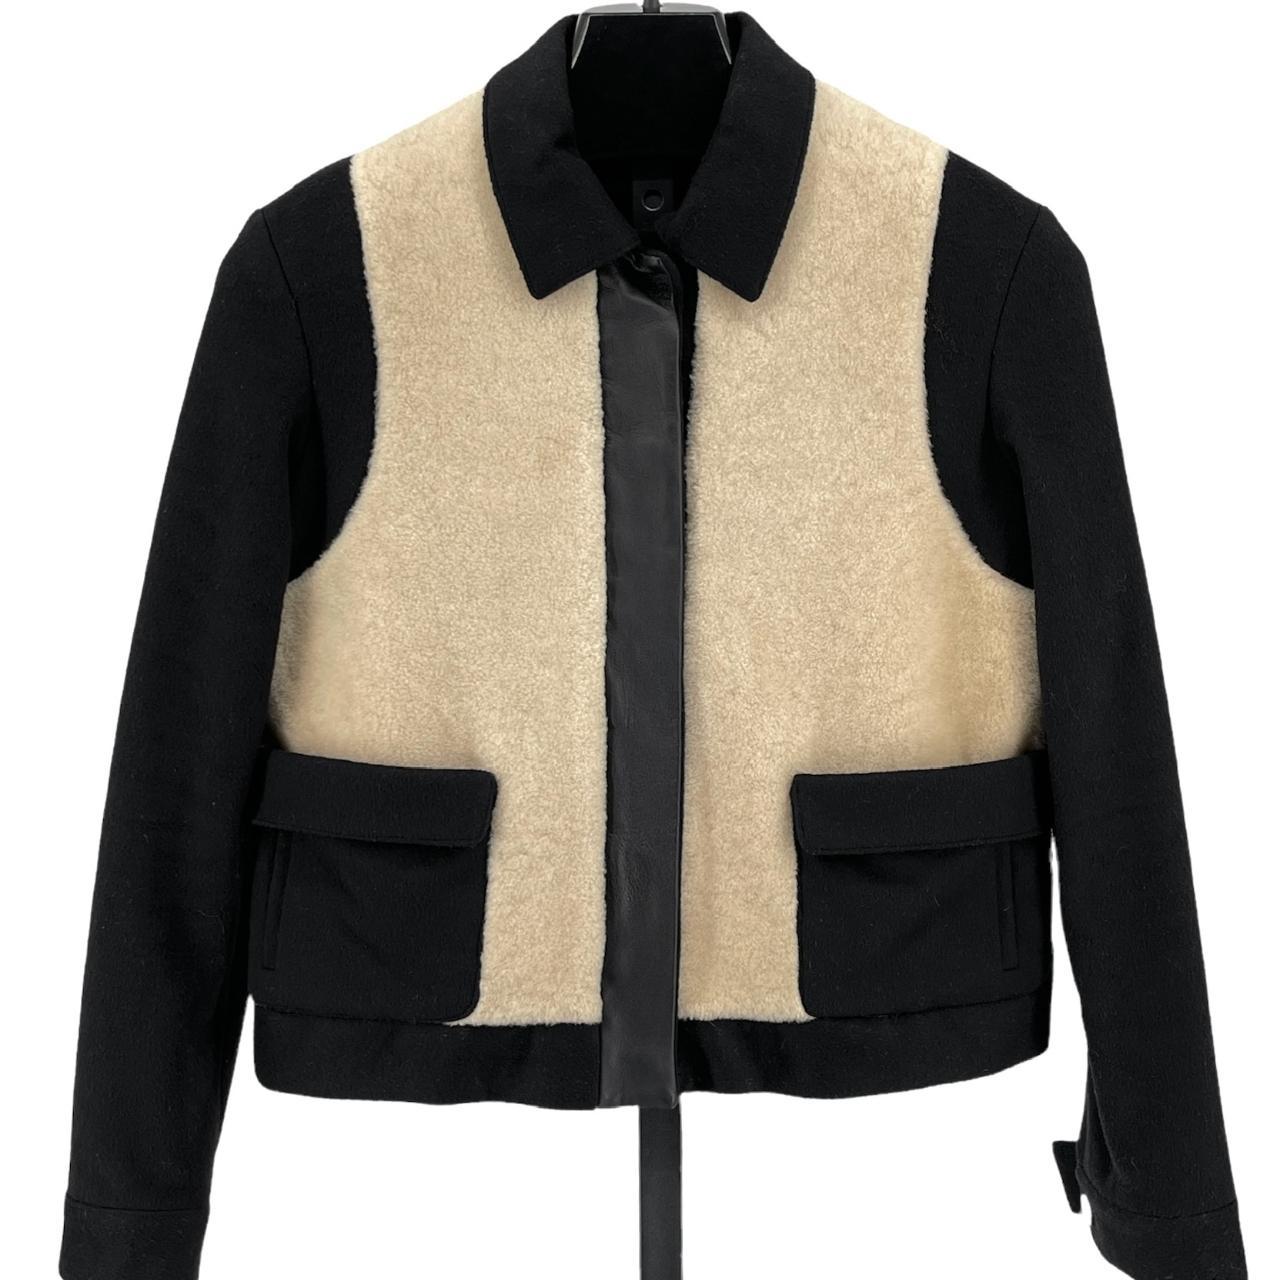 Product Image 2 - This black and cream jacket